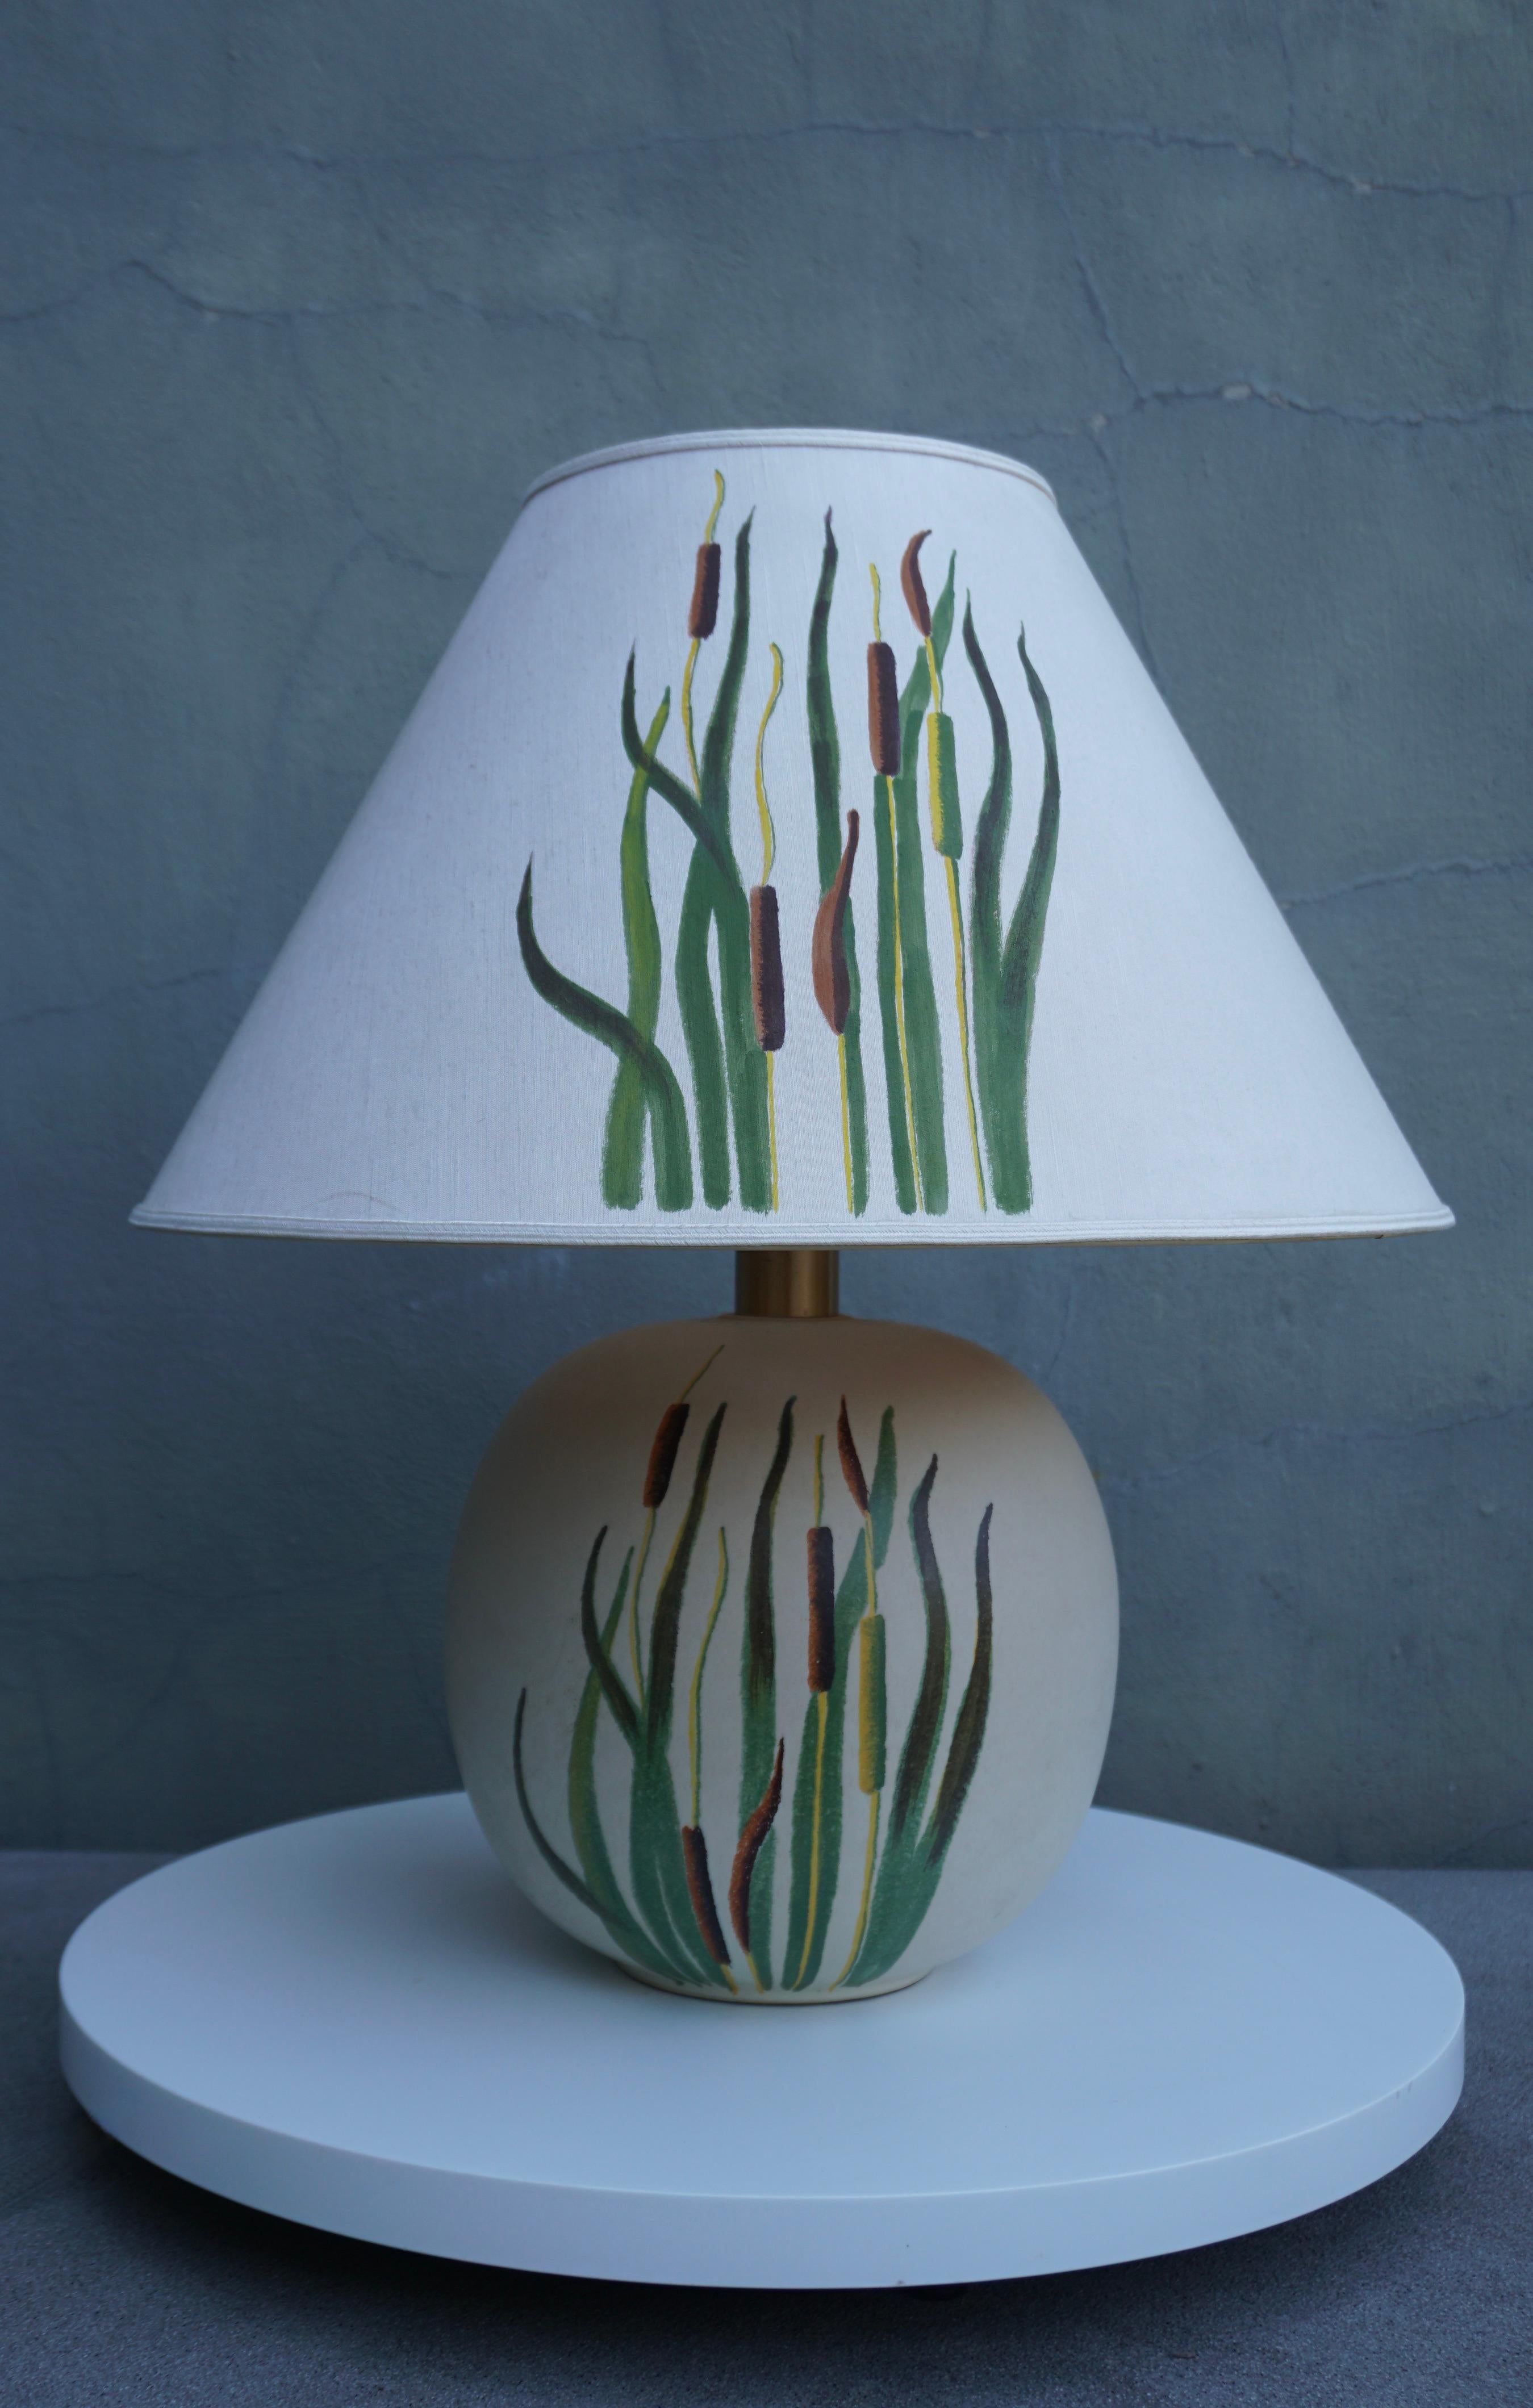 Ceramic Table Lamp with Botanical Representation of Cattails Grass For Sale 2